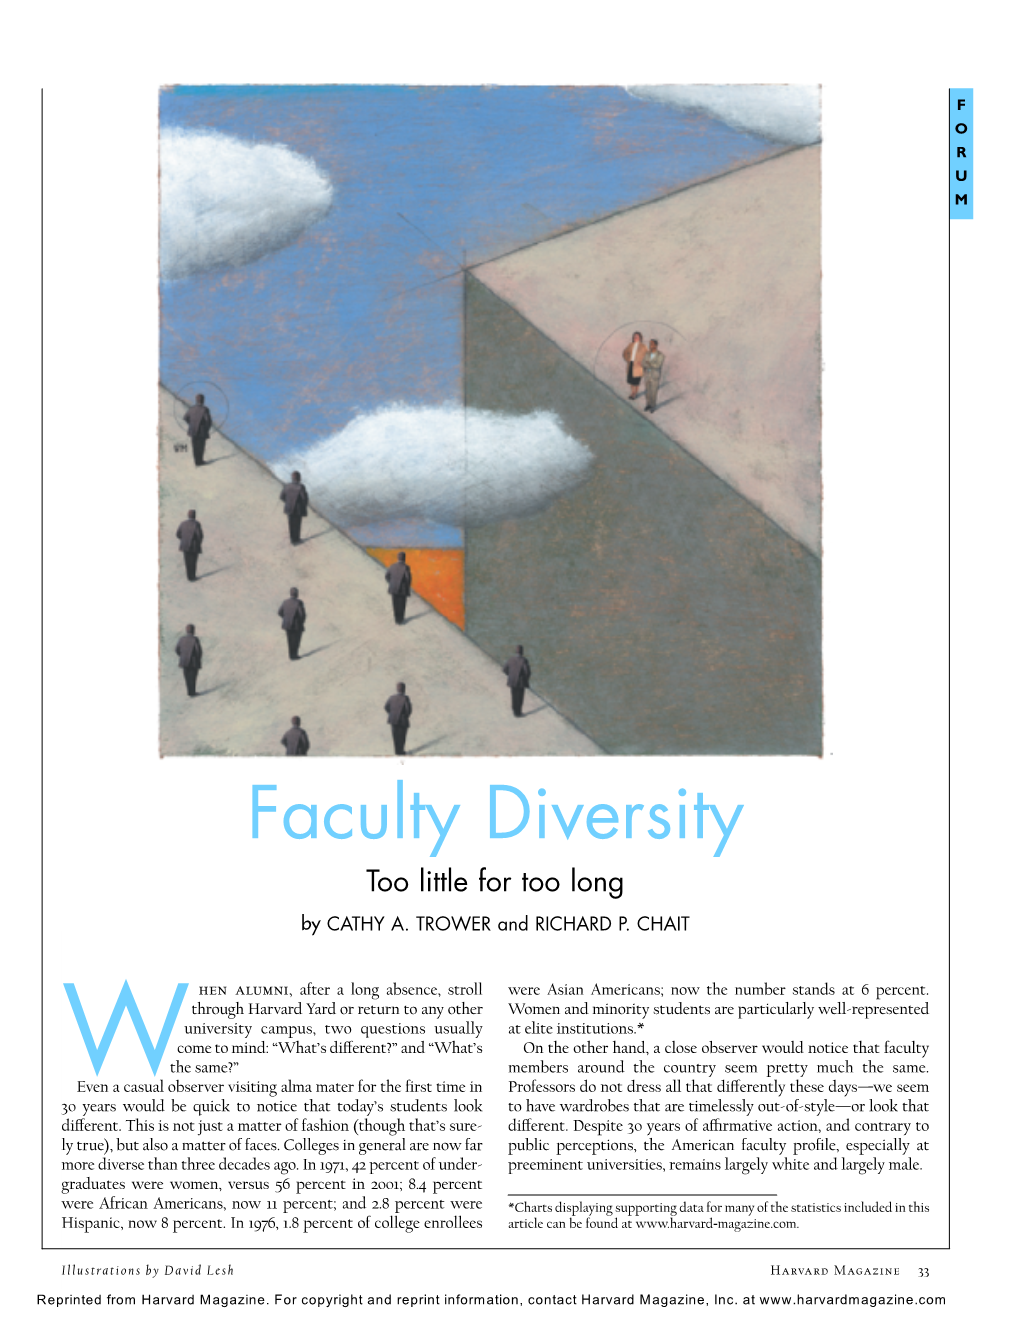 Faculty Diversity Too Little for Too Long by CATHY A